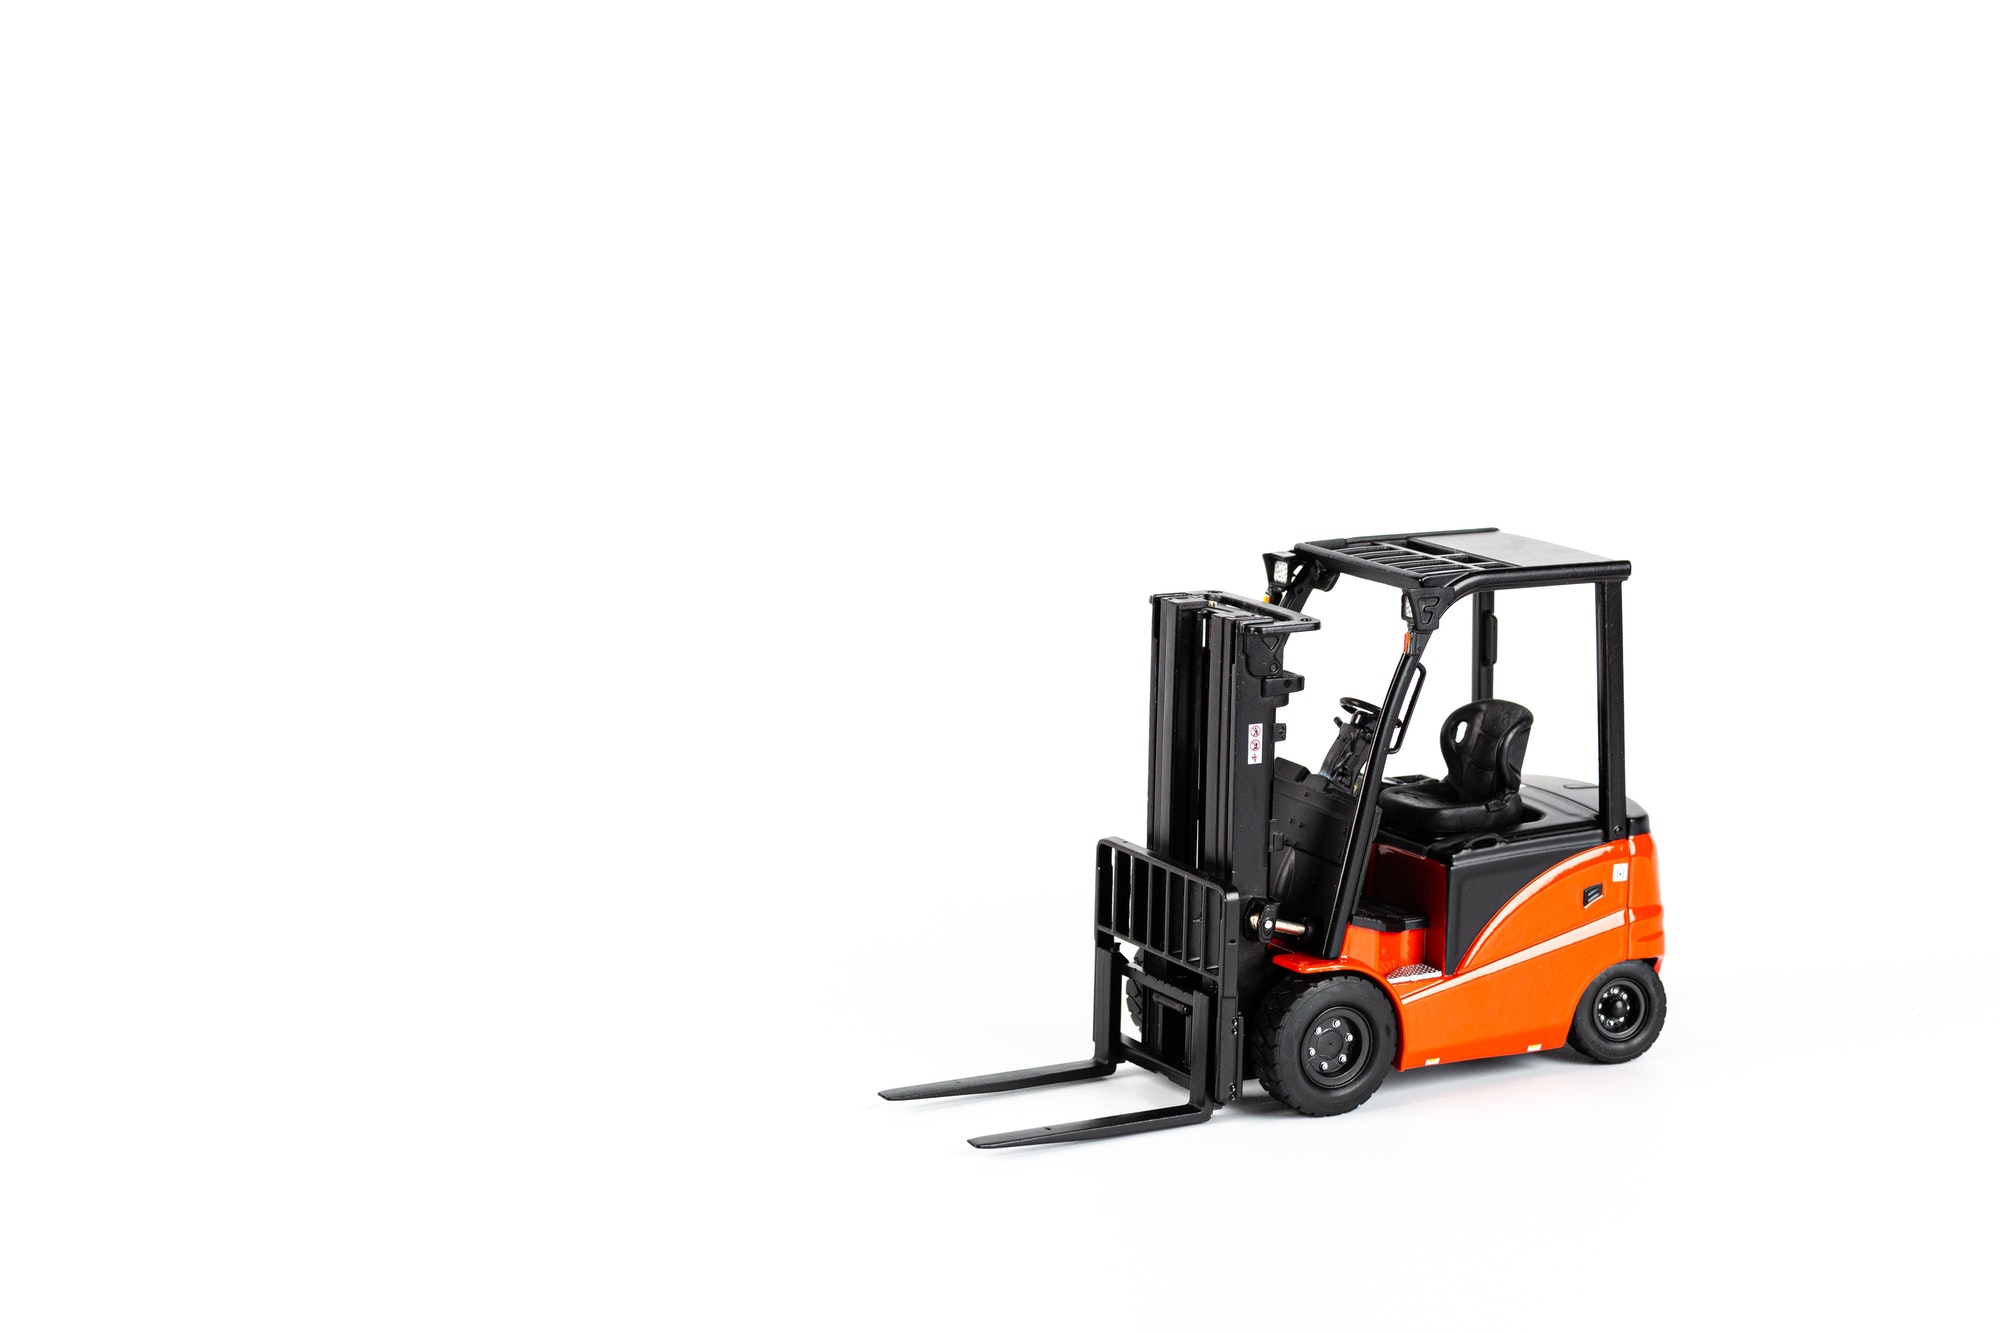 Miniature forklift toy on white background with copy space